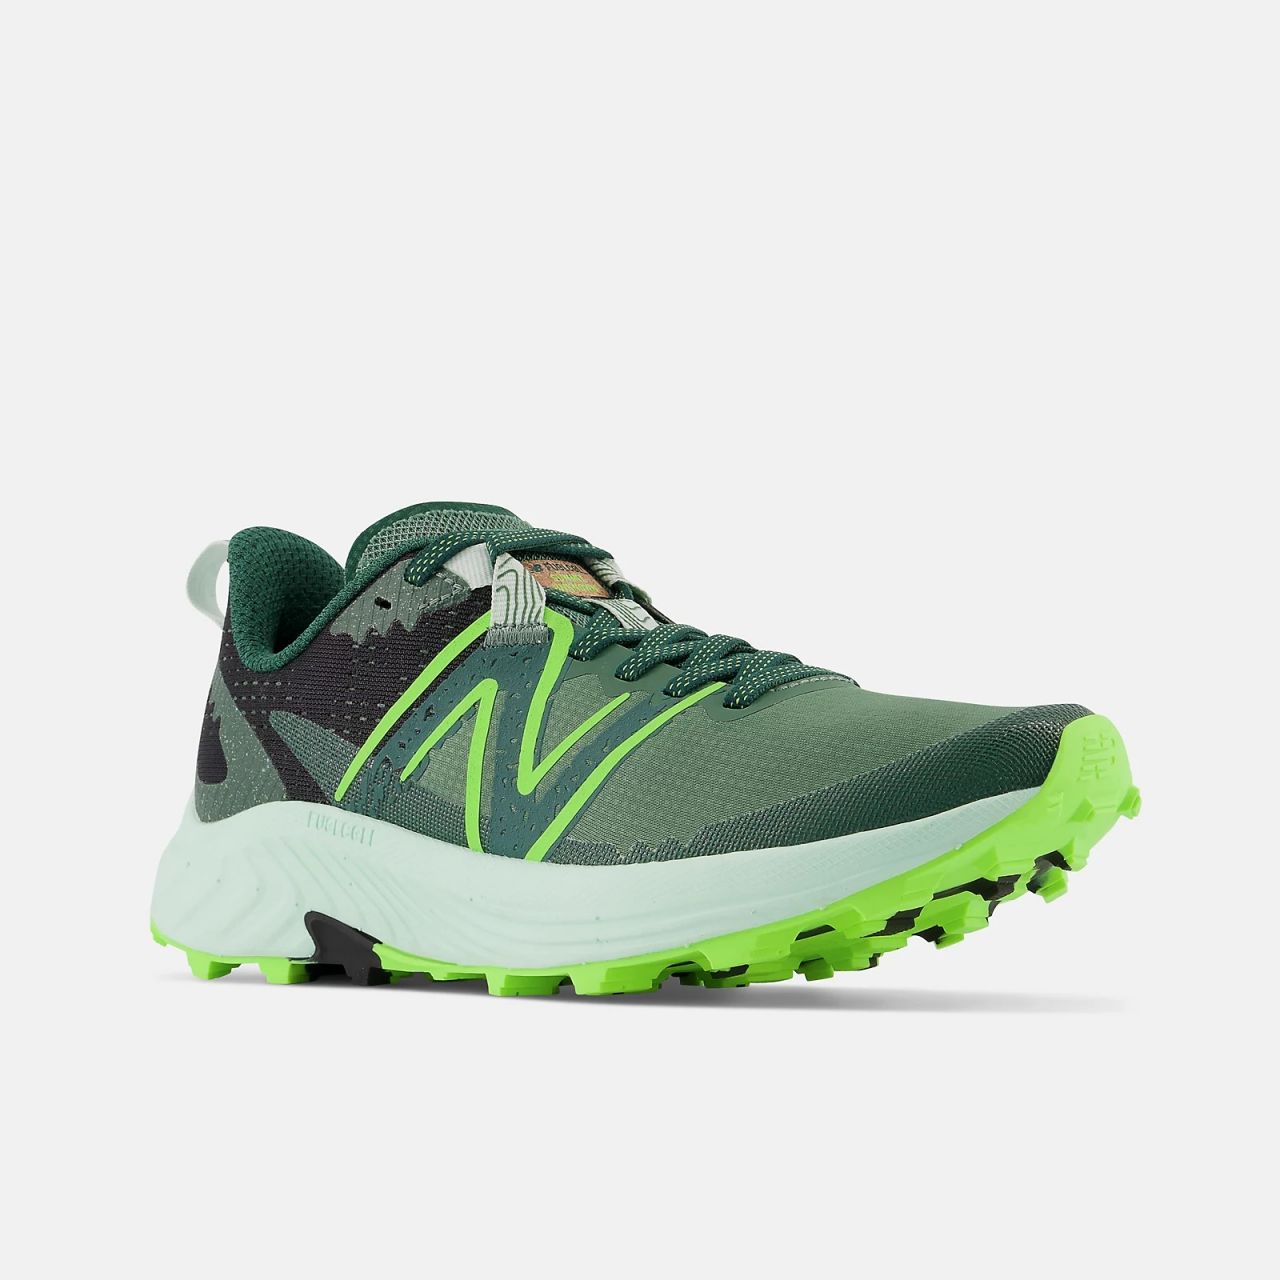 NEW BALANCE FUELCELL SUMMIT UNKNOWN V3 JADE ET BLACK chaussure de  trail femme